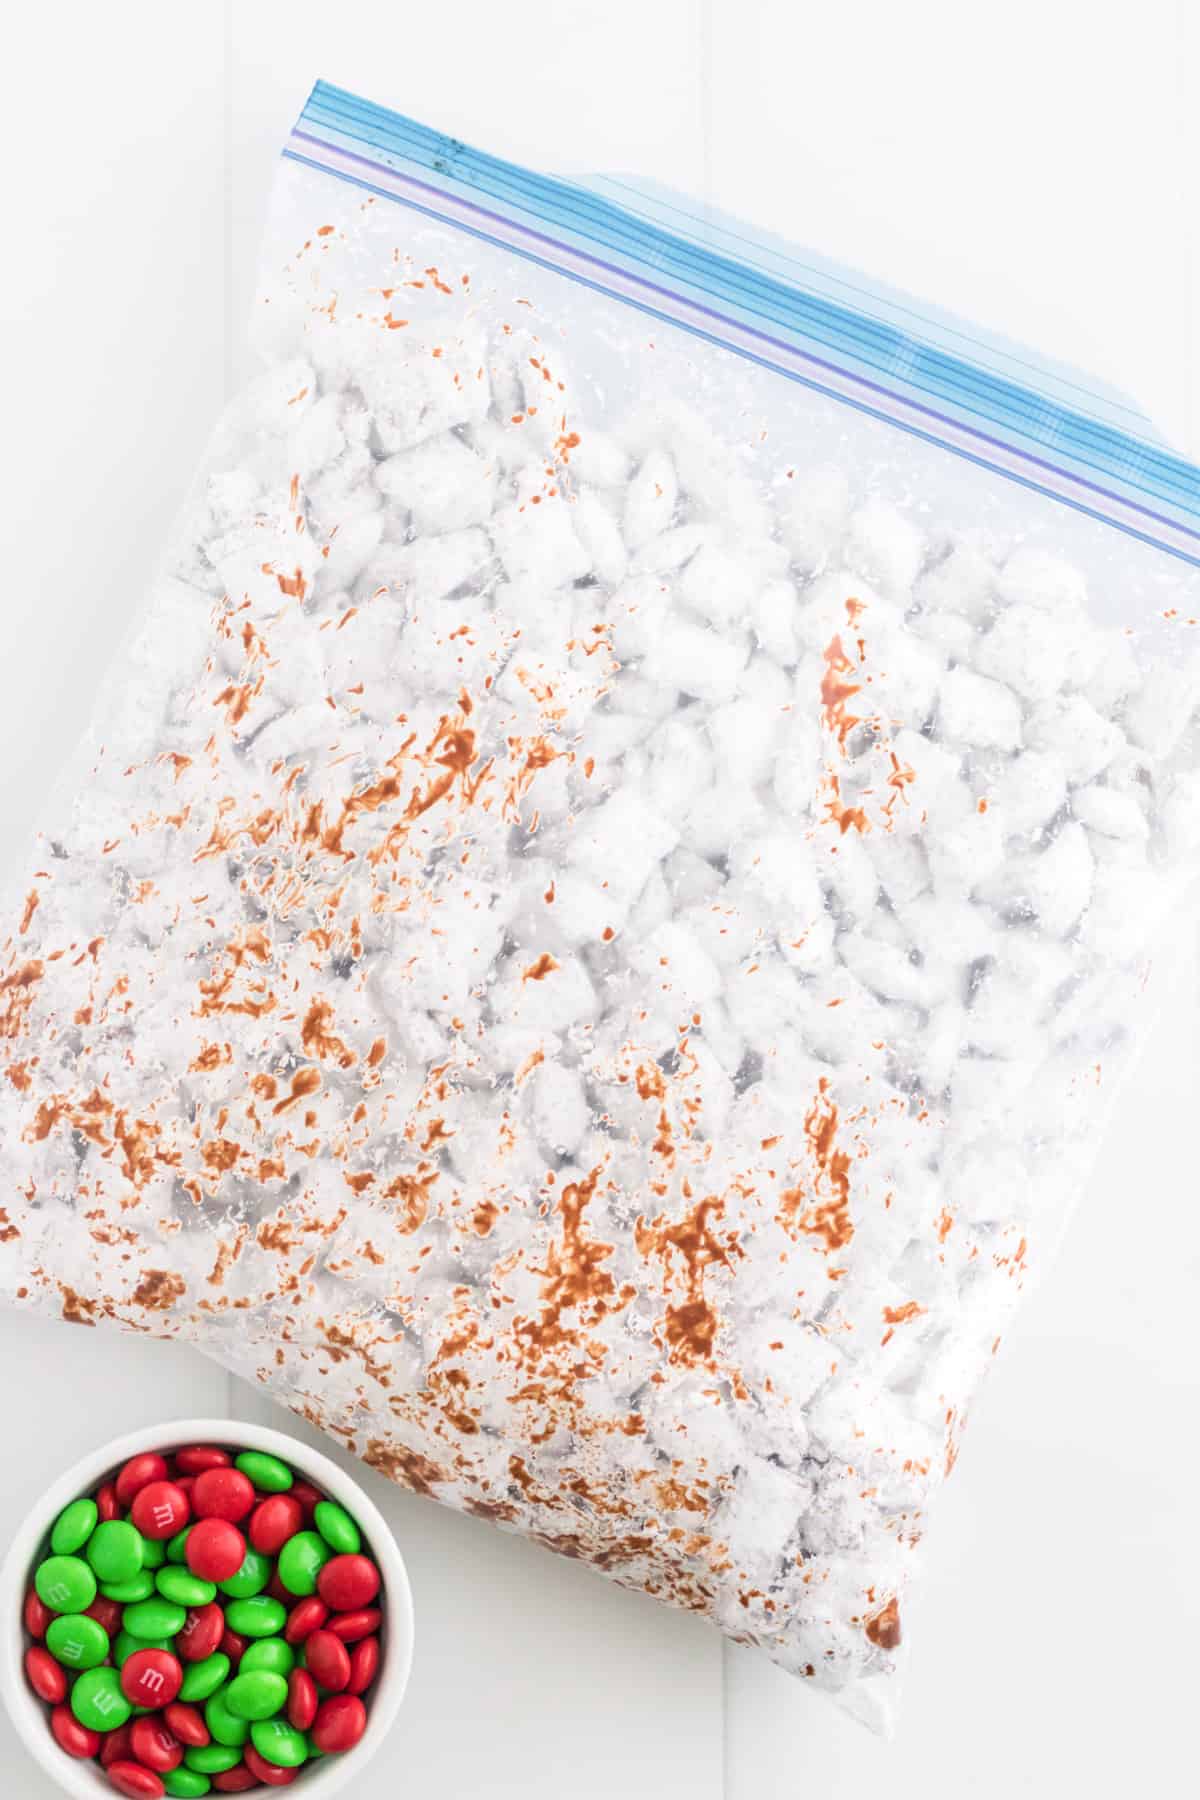 Gallon-size ziplock bag with muddy buddies inside. Bowl of red and green M&Ms are next to it.